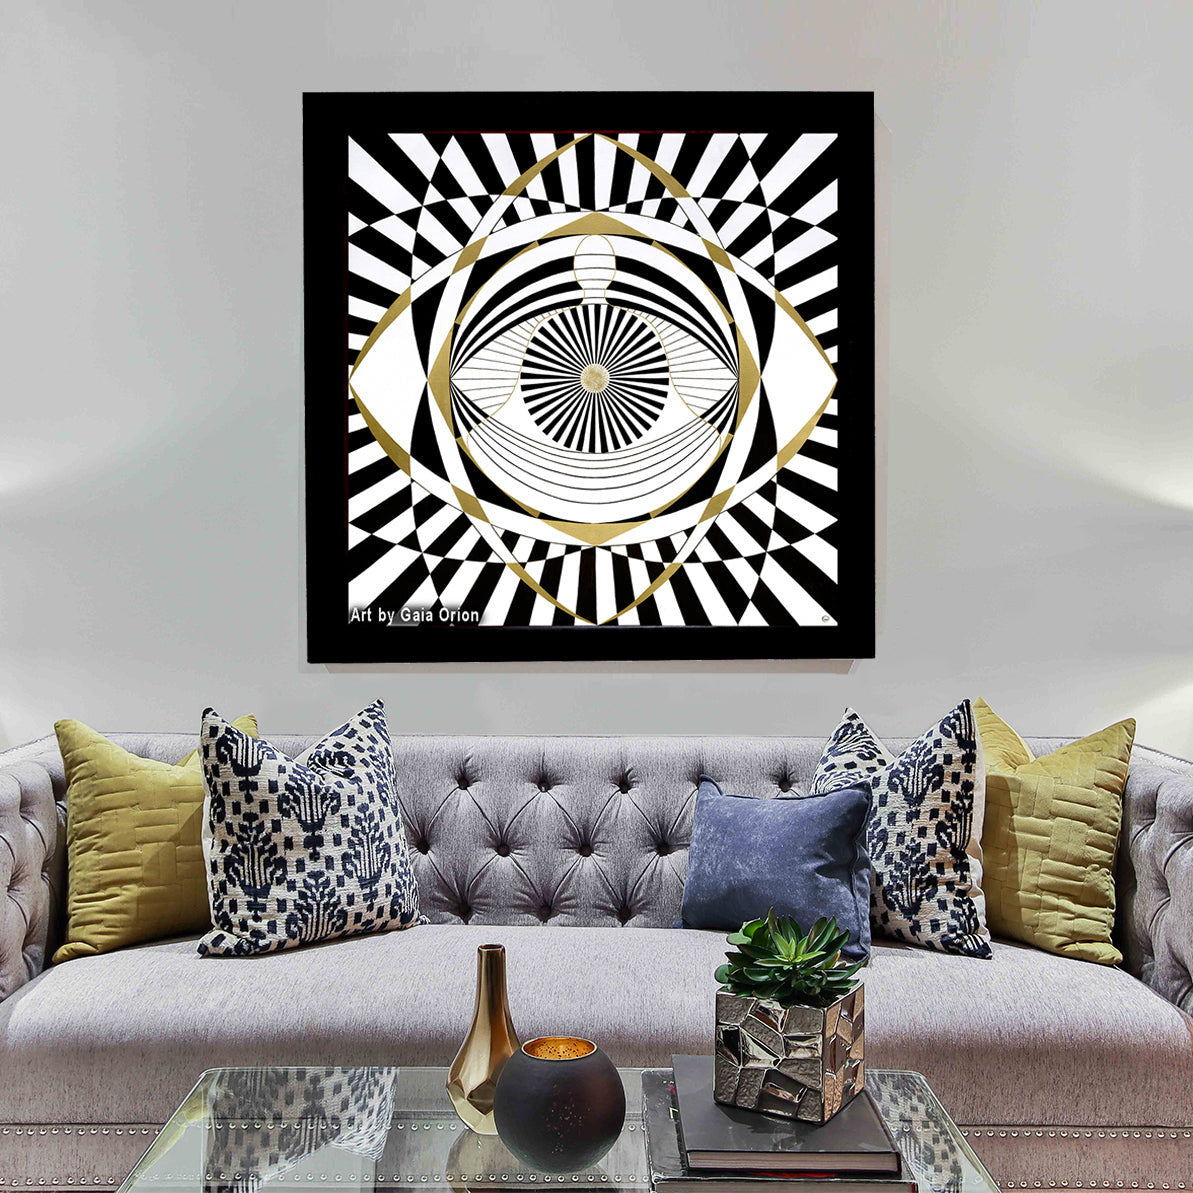 a framed painting blan white and gold geometric lines with a person meditating